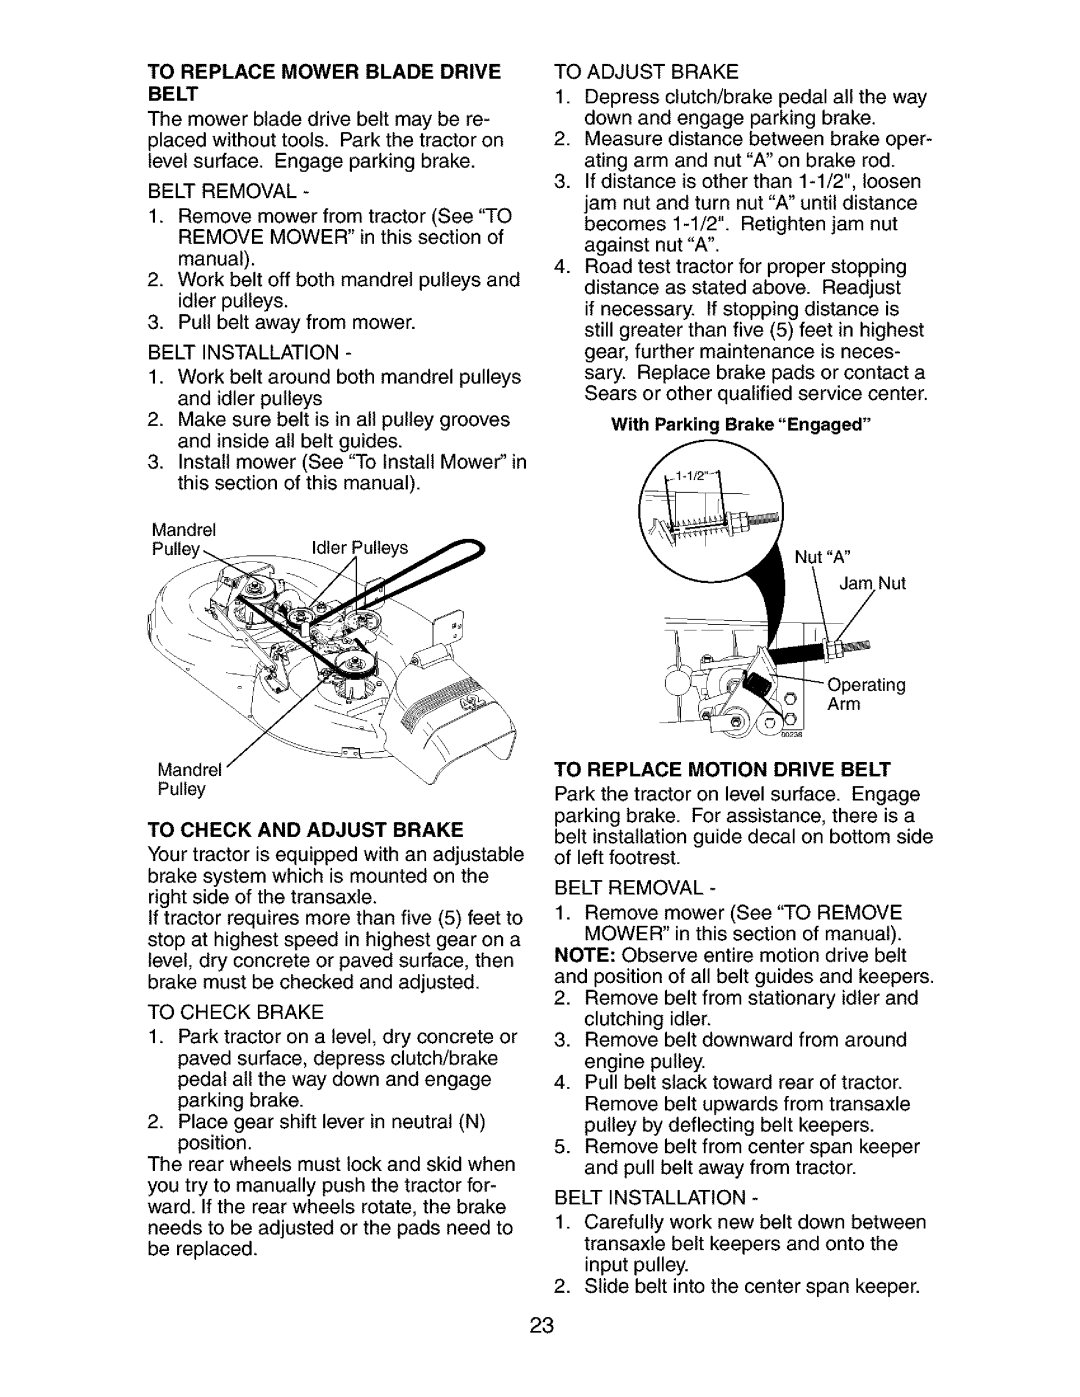 Craftsman 917.273134 owner manual To Check And Adjust Brake, To Replace Motion Drive Belt 